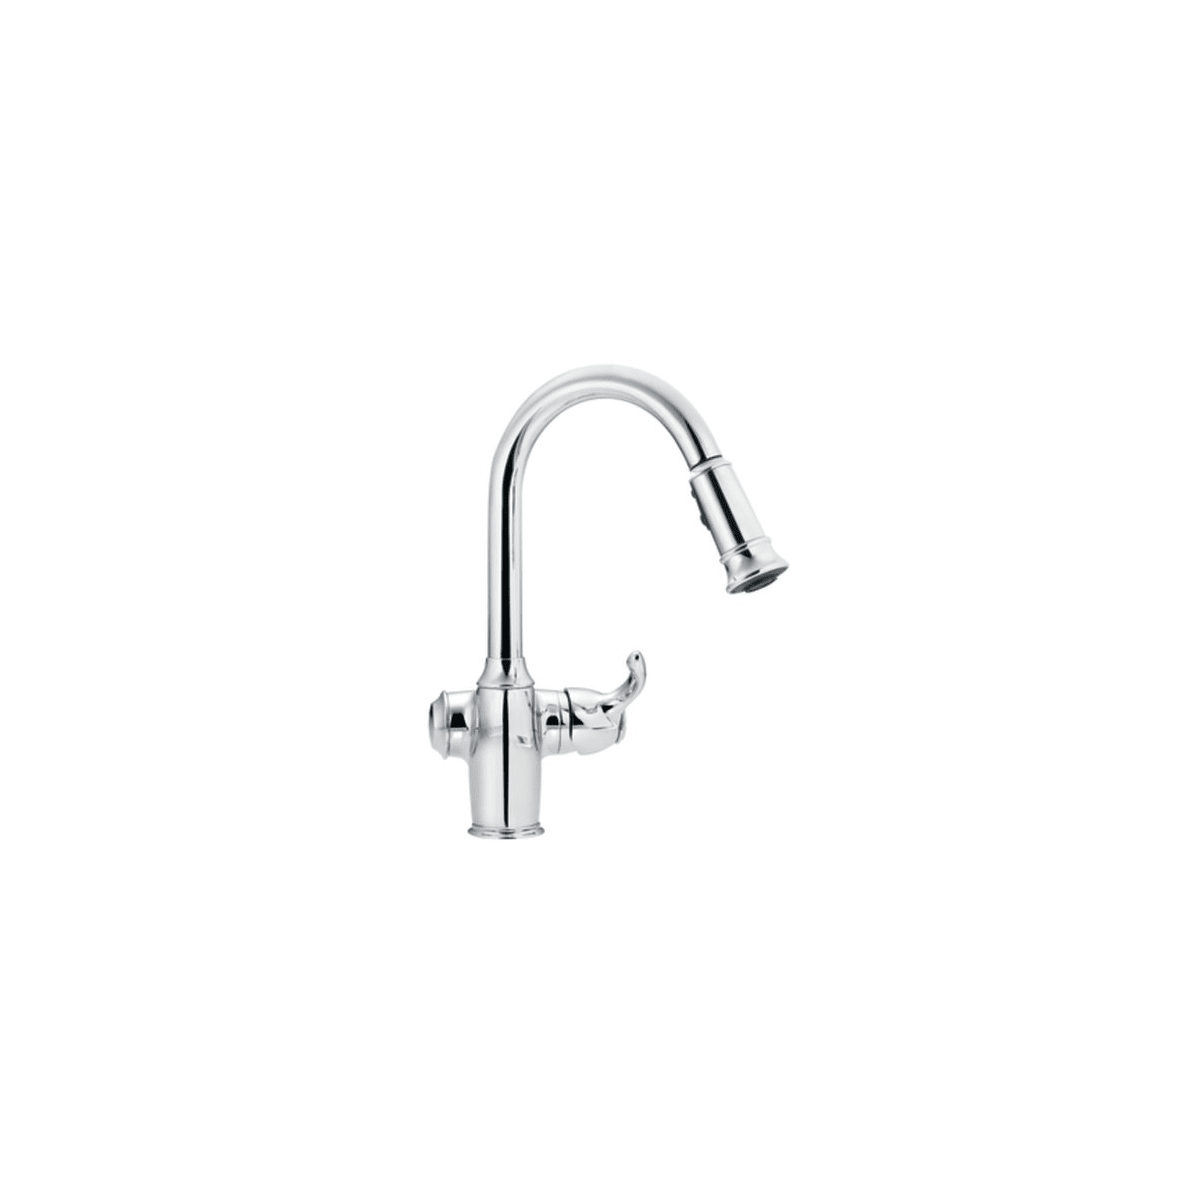 Moen S728c Chrome Single Handle Pulldown Kitchen Faucet From The